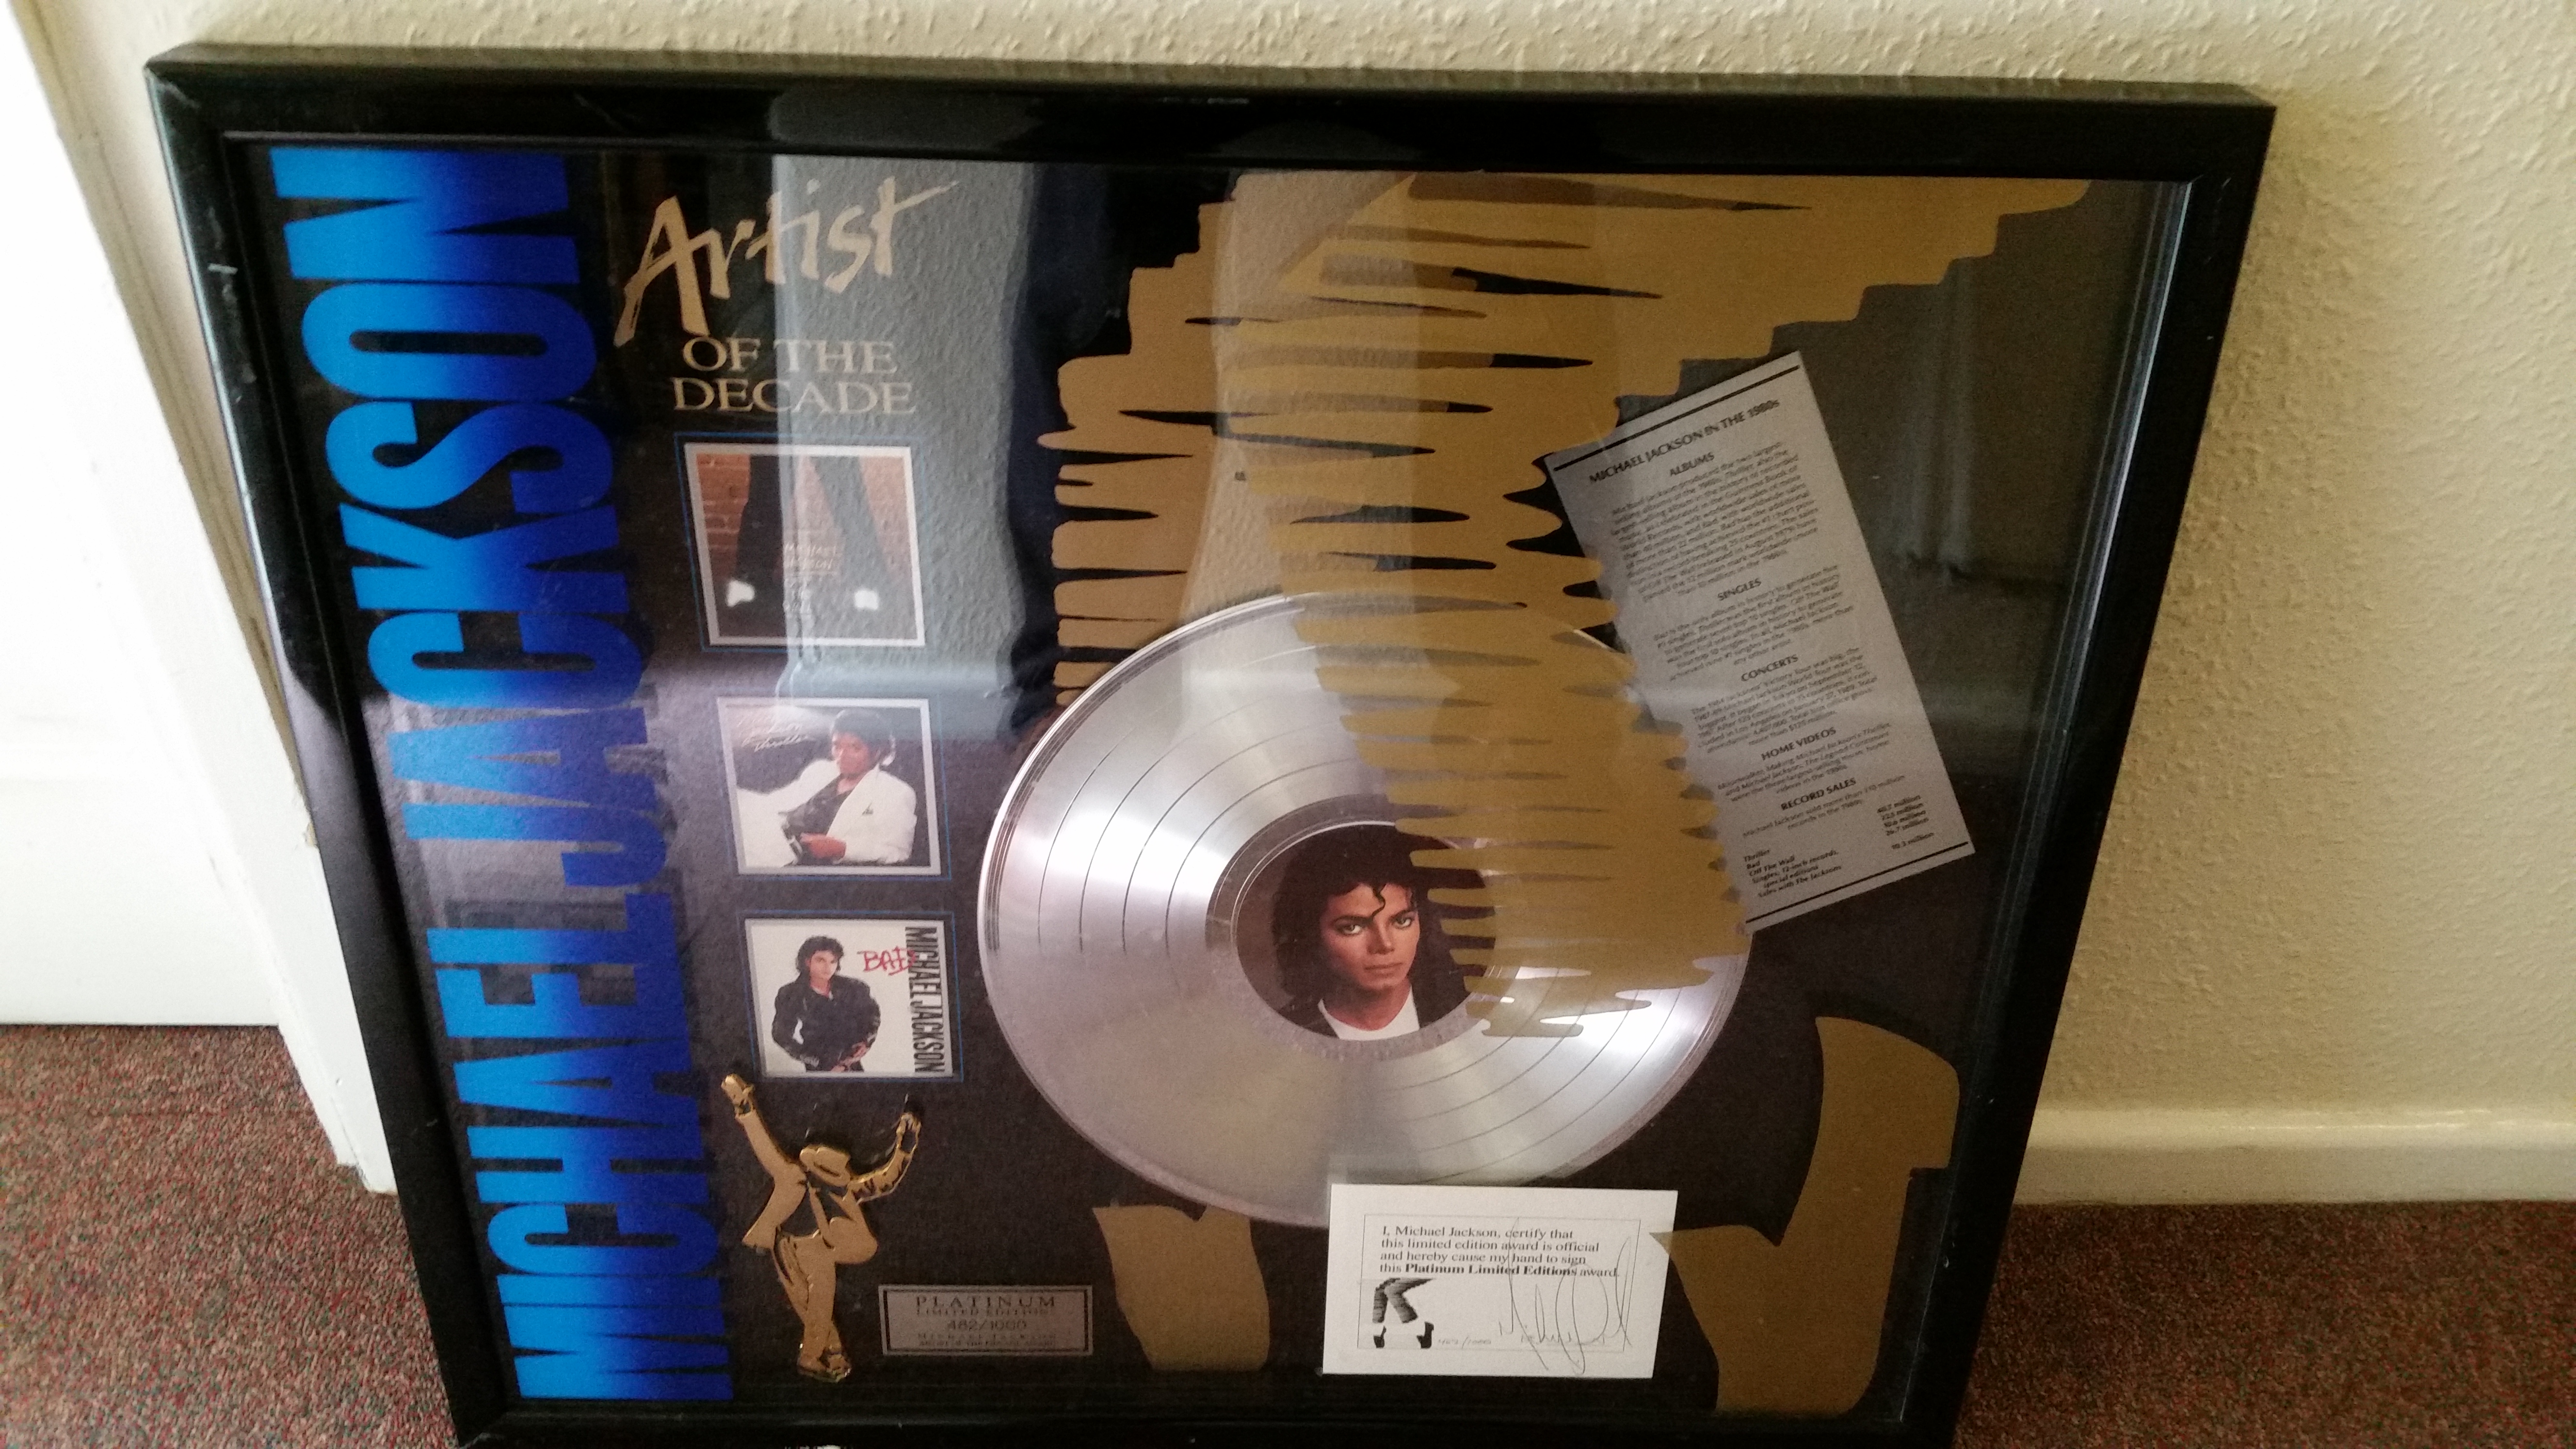 POP MUSIC, Michael Jackson presentation piece, Artist of the Decade, inc., signed card (with dancing